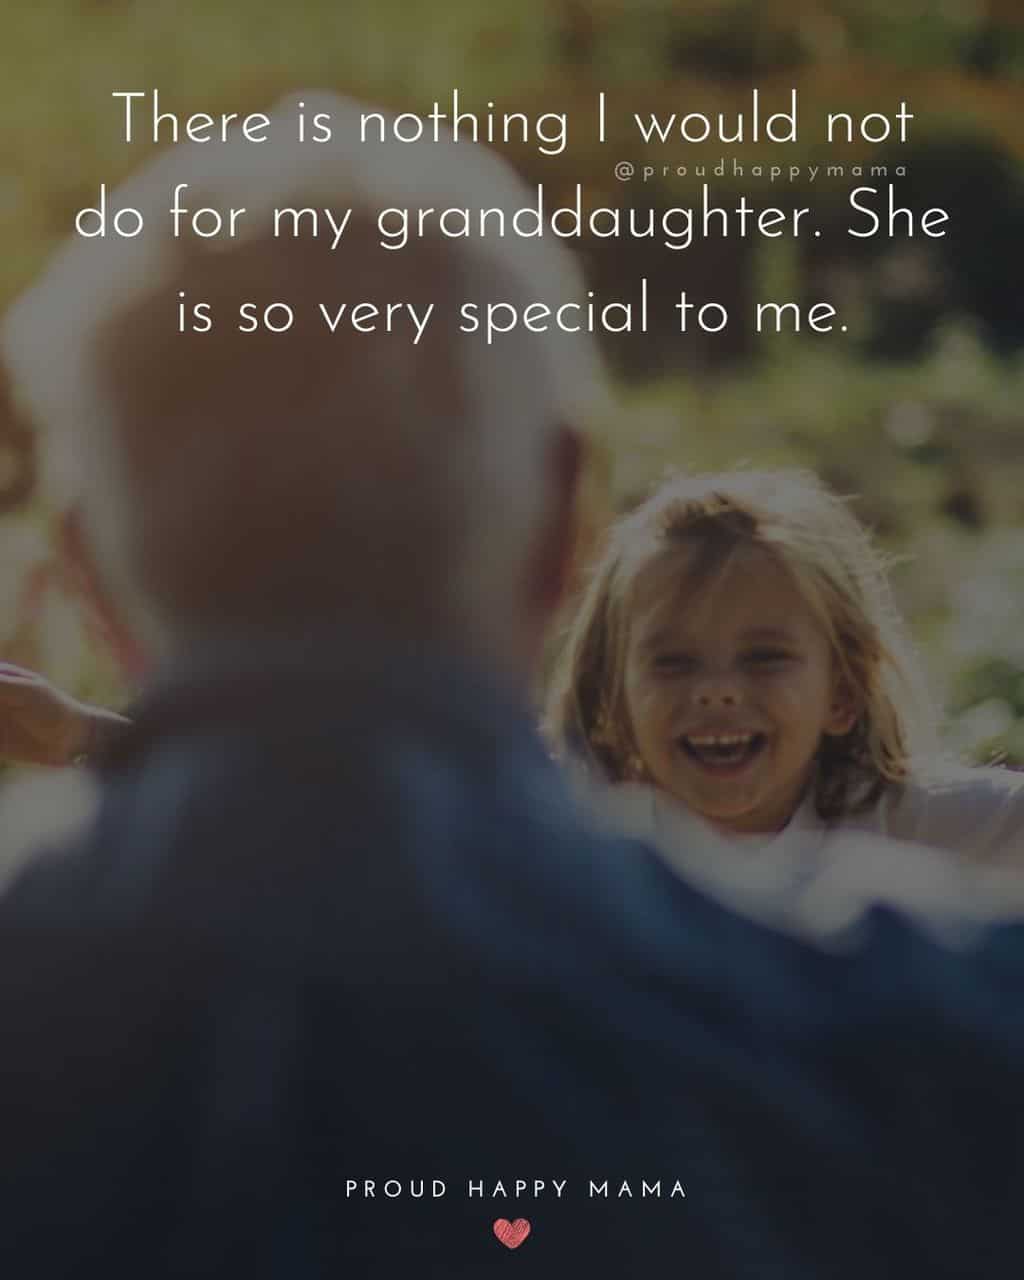 Granddaughter Quotes - There is nothing I would not do for my granddaughter. She is so very special to me.’